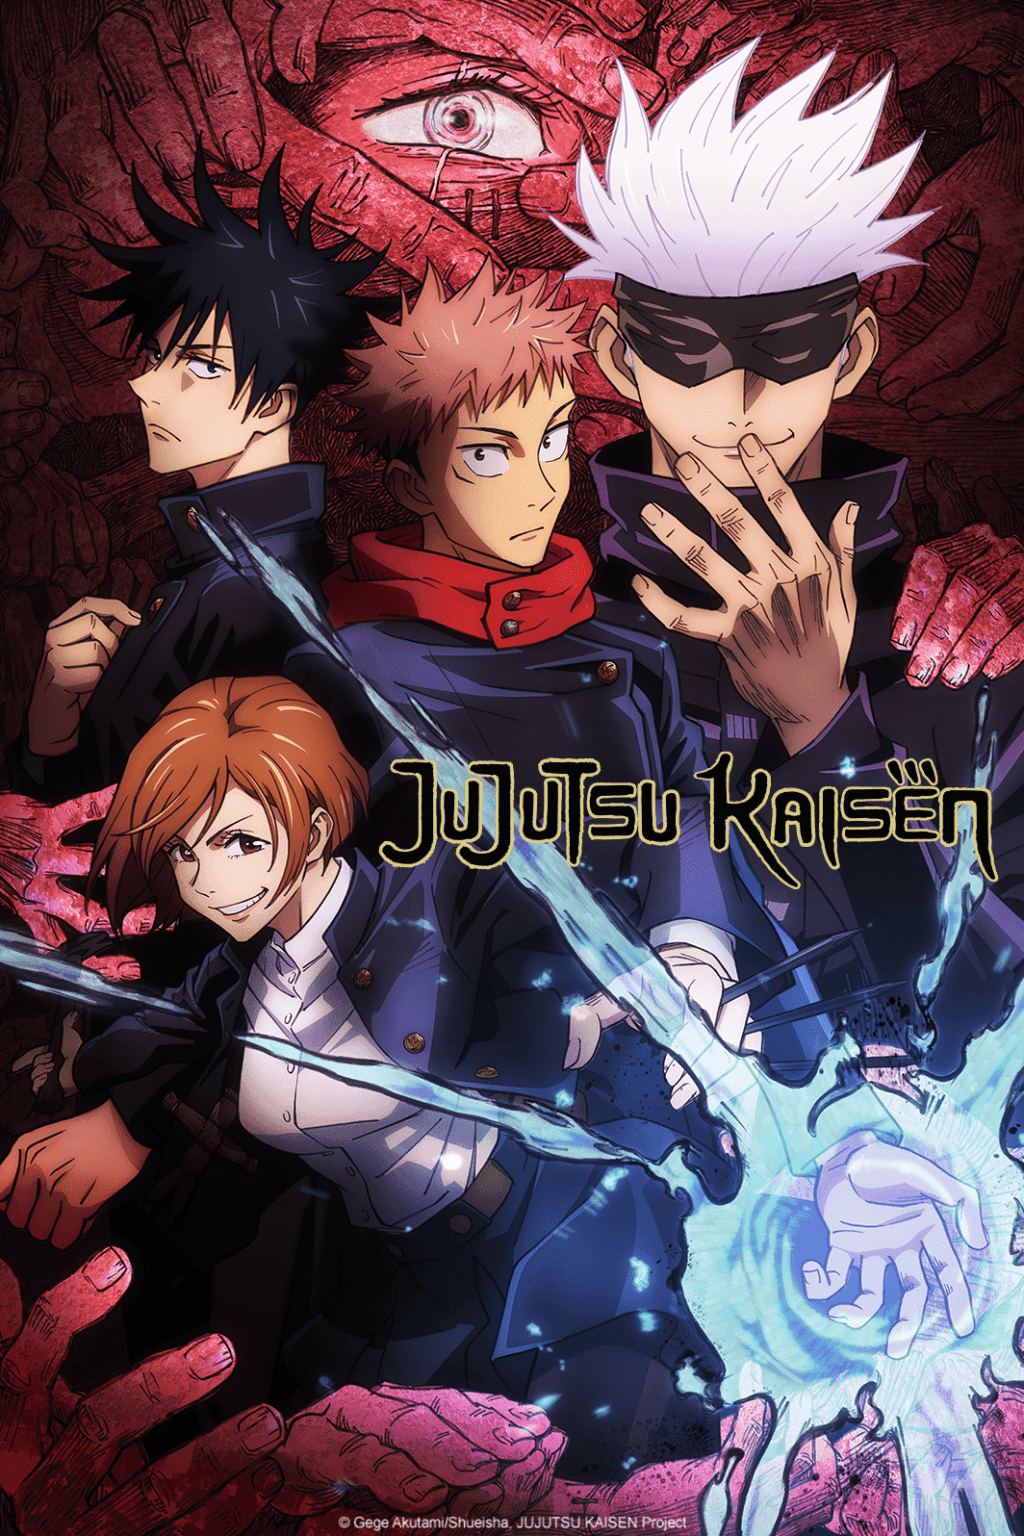 Crunchyroll S Uk Ireland Autumn 2020 Anime Simulcast Line Up Jujutsu Kaisen Danmachi Iii Noblesse Burn The Witch Yashahime More Anime Uk News Simulcasts straight from japan, tons of dubs, subs, ova's and the all new dubcast editions! jujutsu kaisen danmachi iii noblesse